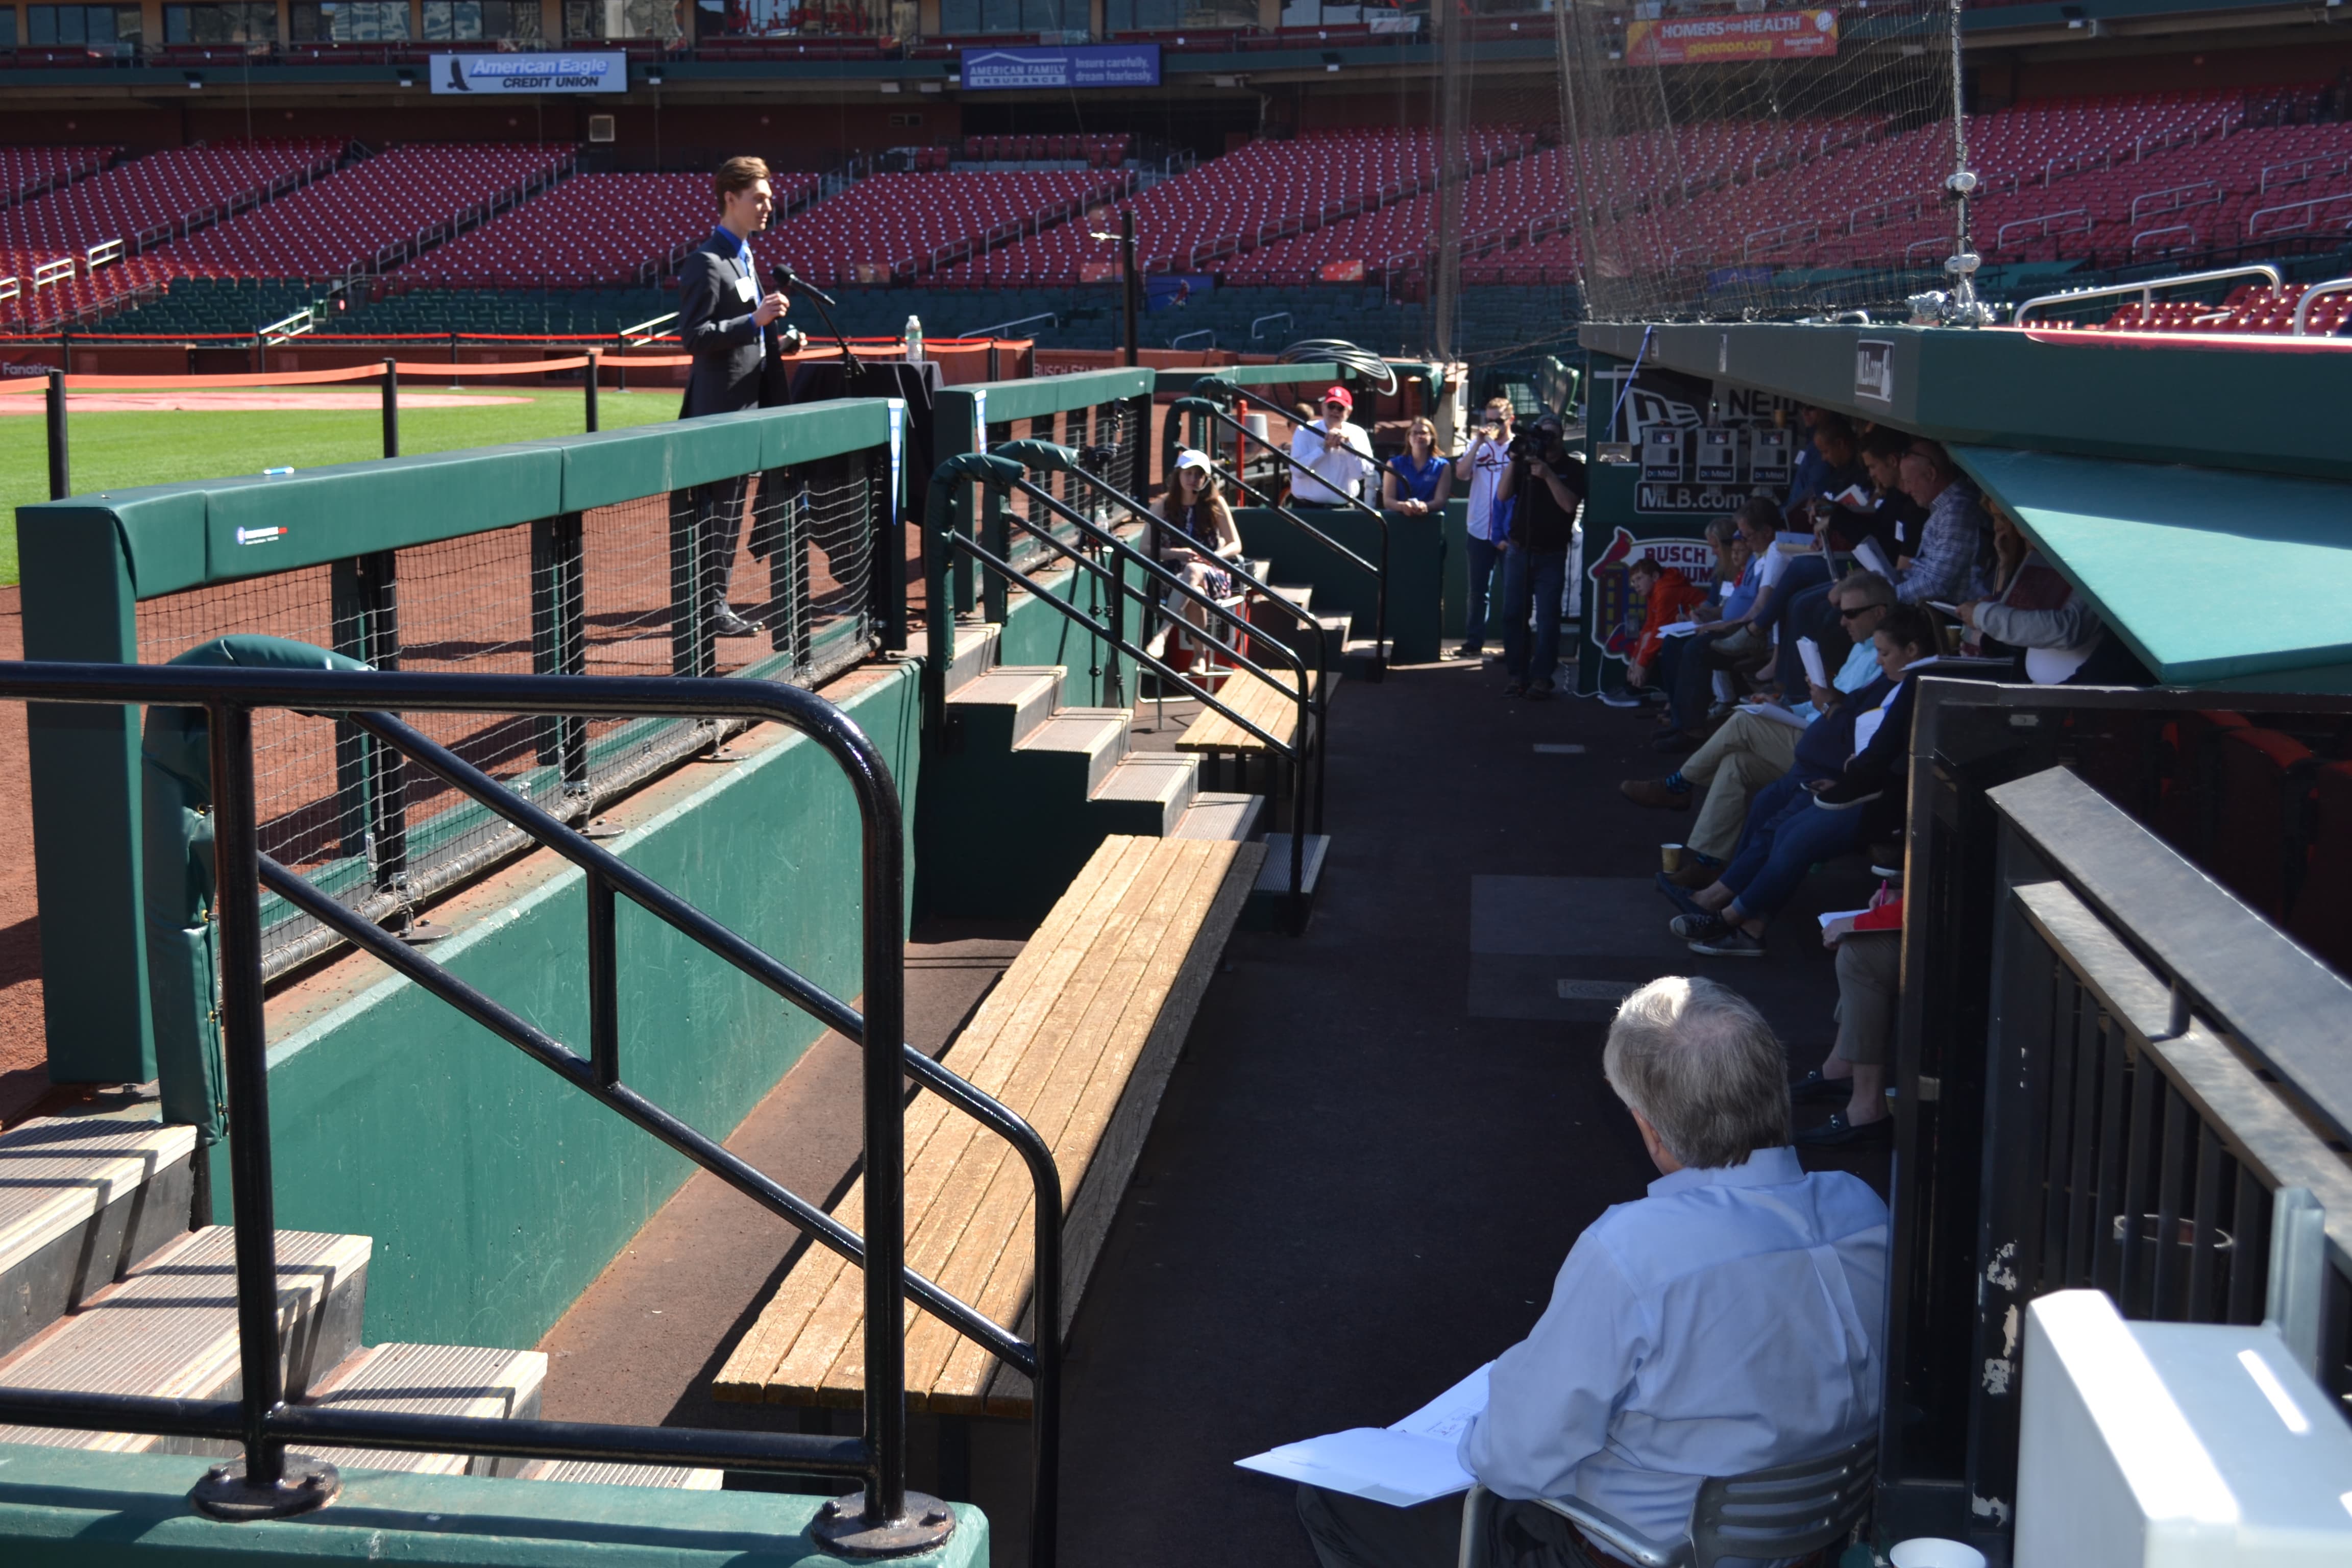 A student stands at the top of a dug out at Busch stadium speaking to a seated group 